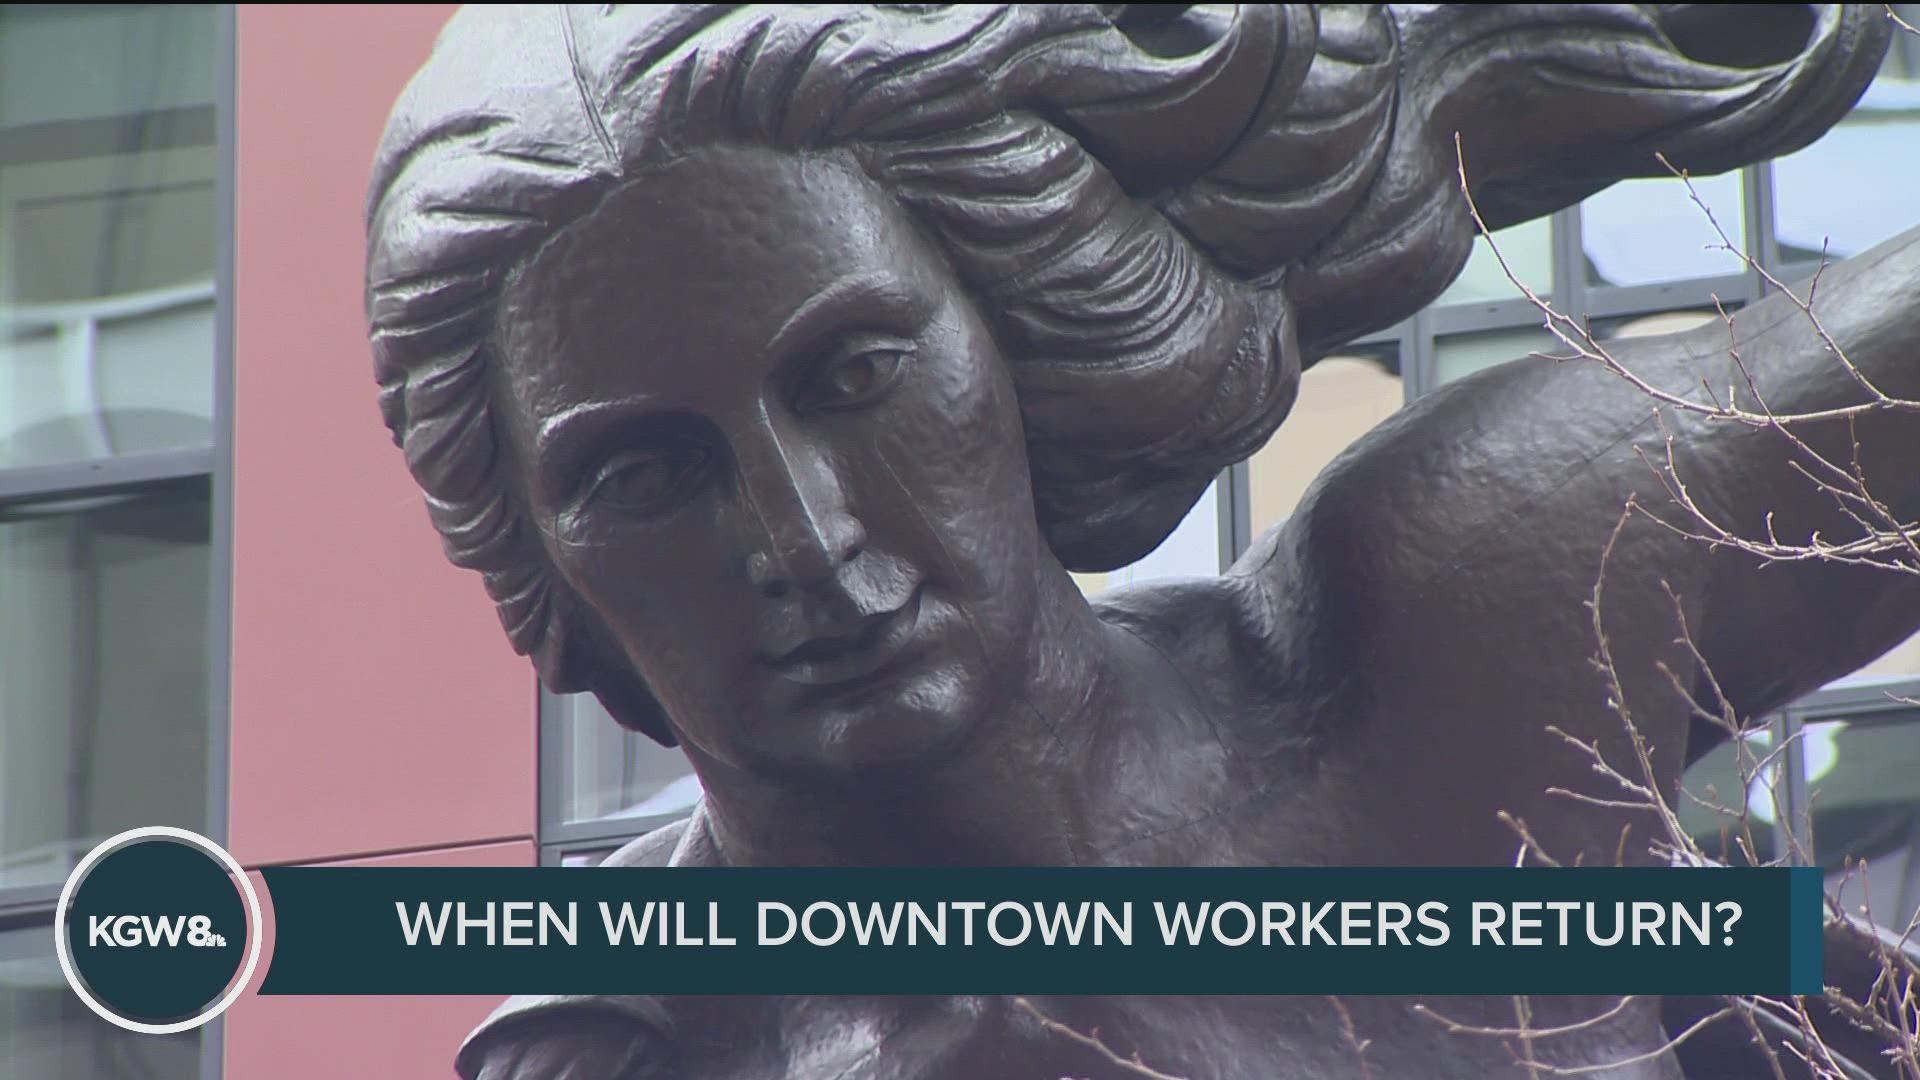 Mask mandates are lifted, but many businesses aren’t bringing workers back downtown, and it’s hurting smaller retailers downtown.